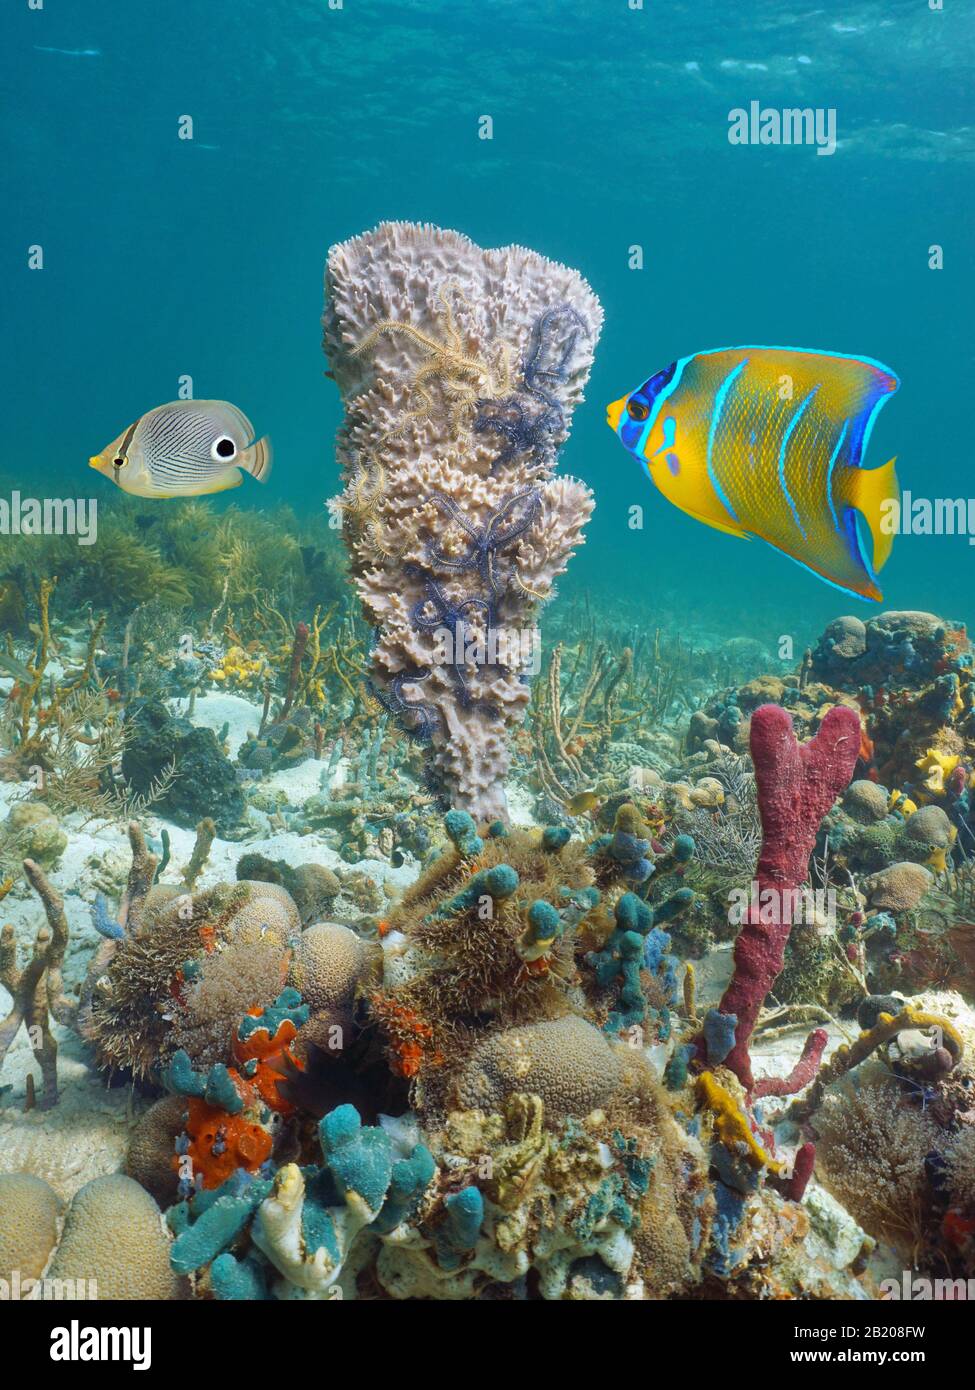 Caribbean sea marine life underwater, sponge with brittle stars and tropical fish in a coral reef Stock Photo